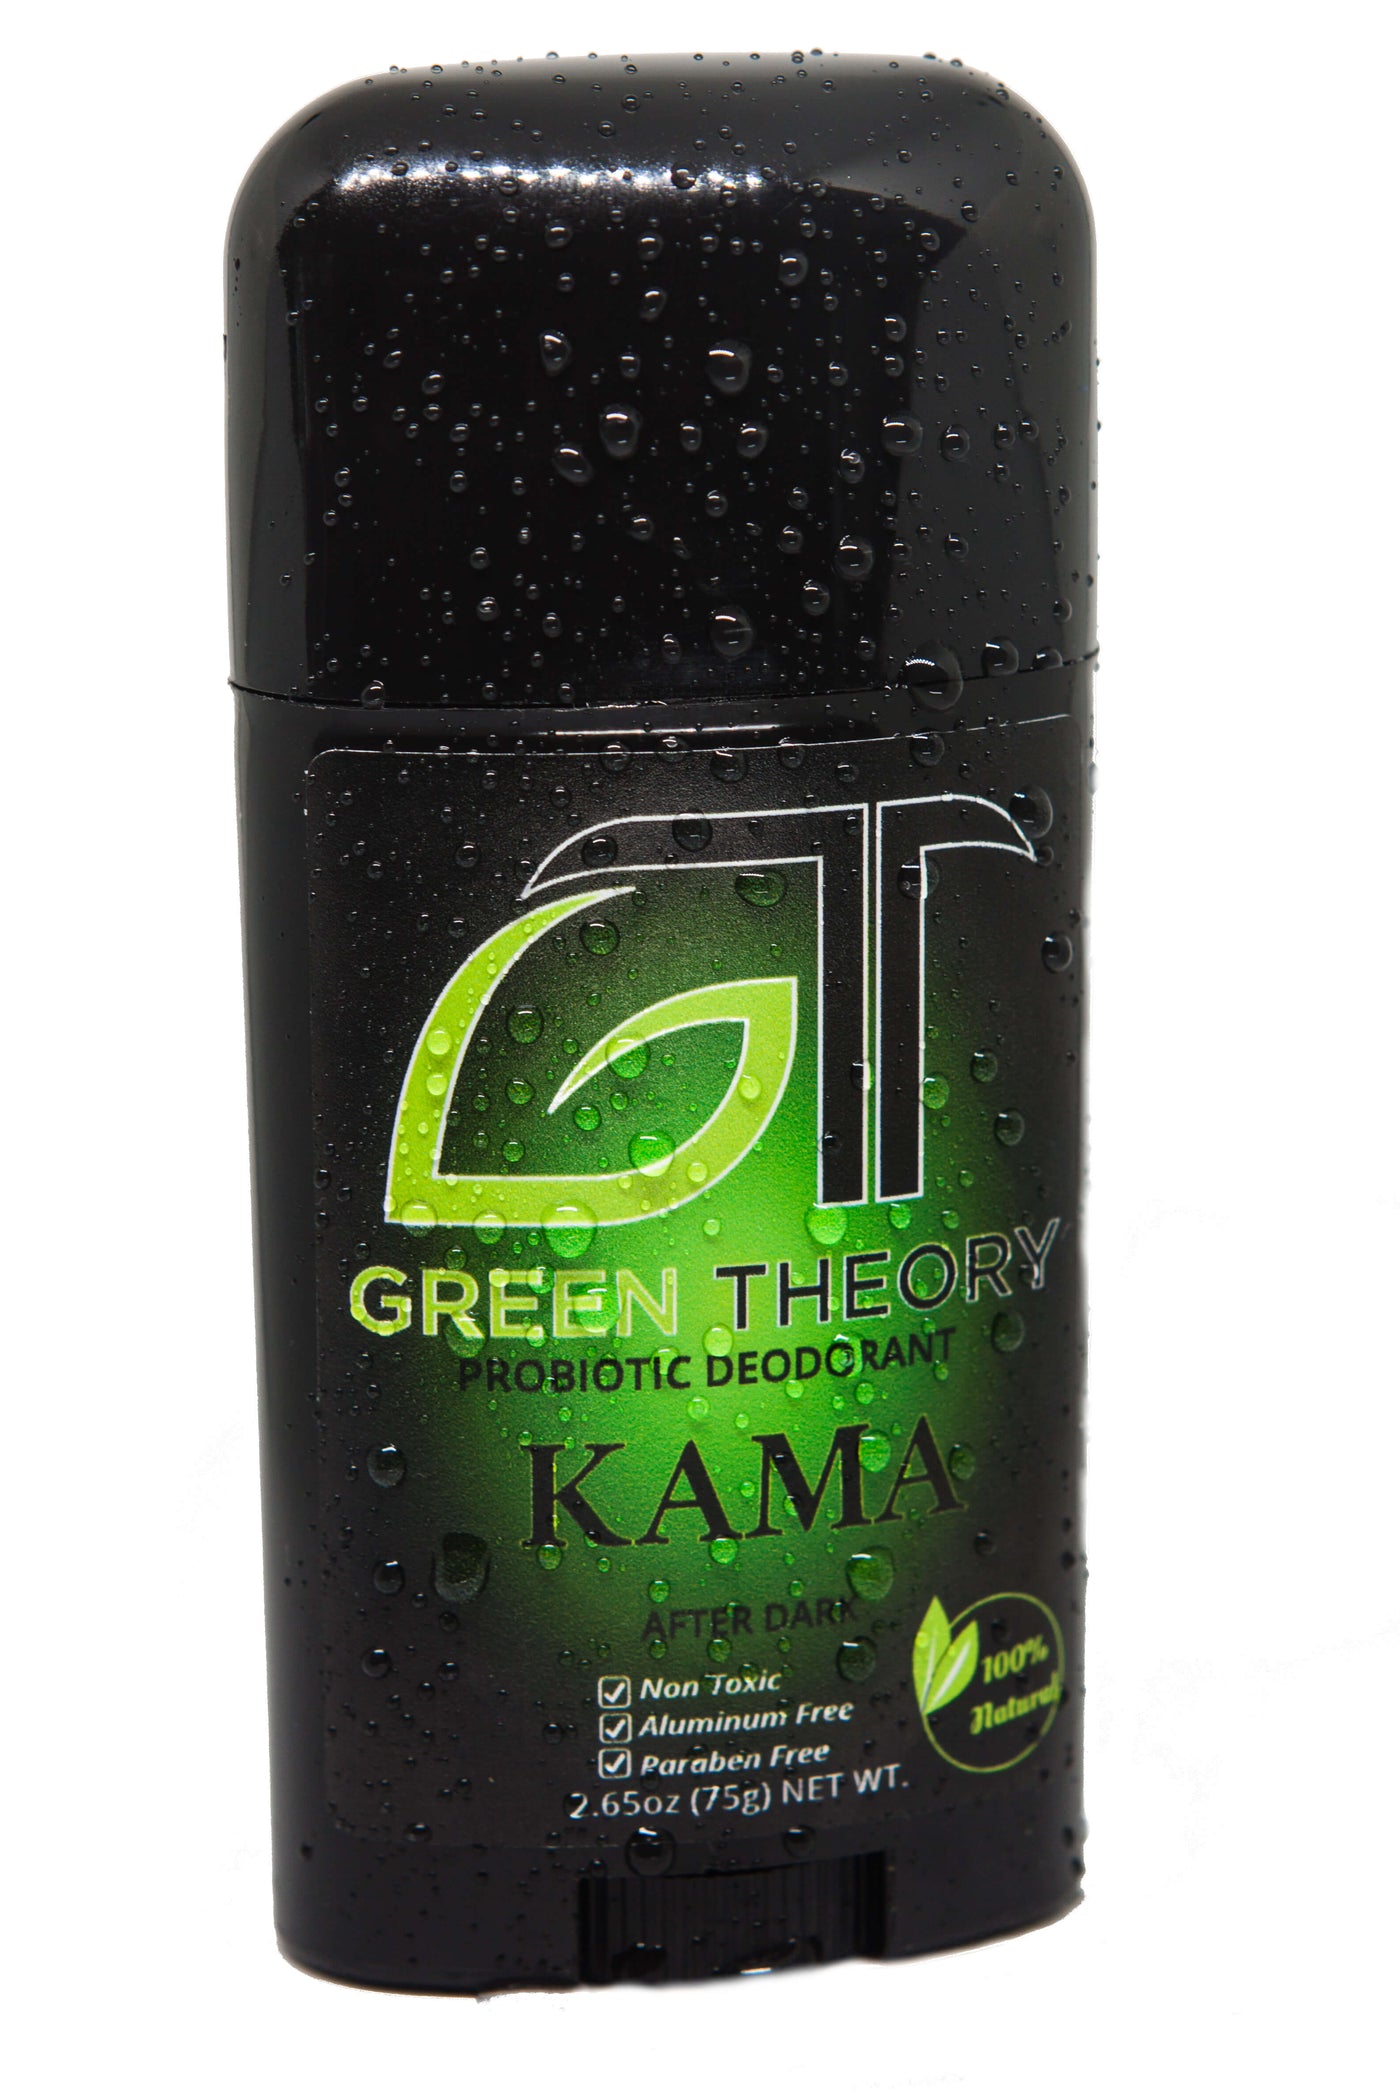 Kama probiotic natural aluminum free deodorant for men pictured standing up covered in water droplets